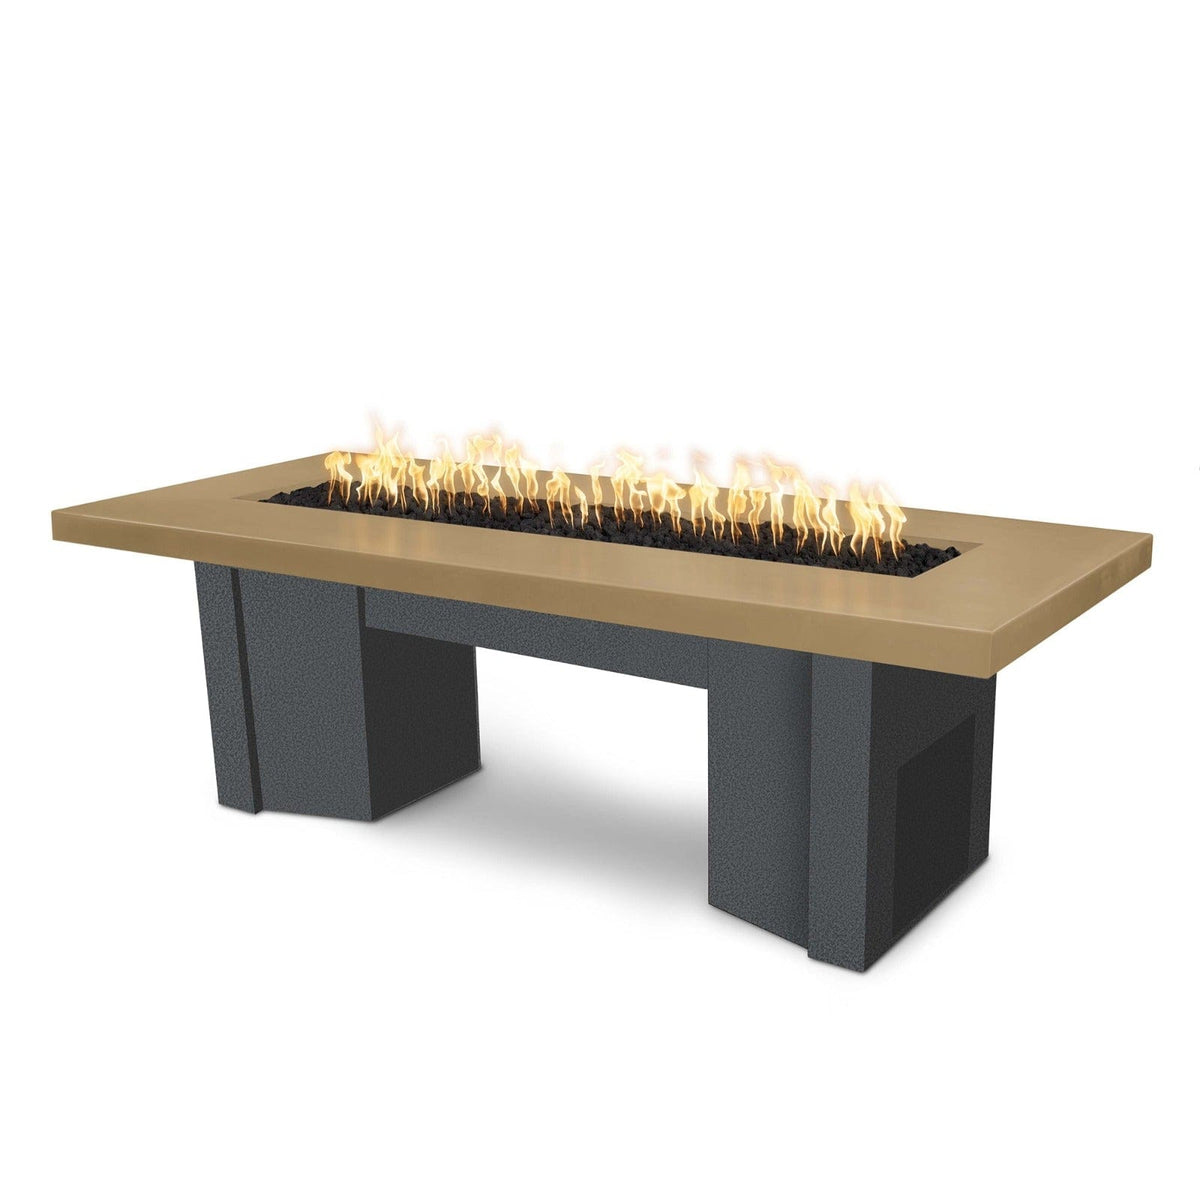 The Outdoor Plus Fire Features Brown (-BRN) / Silver Vein Powder Coated Steel (-SLV) The Outdoor Plus 78&quot; Alameda Fire Table Smooth Concrete in Liquid Propane - 12V Electronic Ignition / OPT-ALMGFRC78E12V-LP